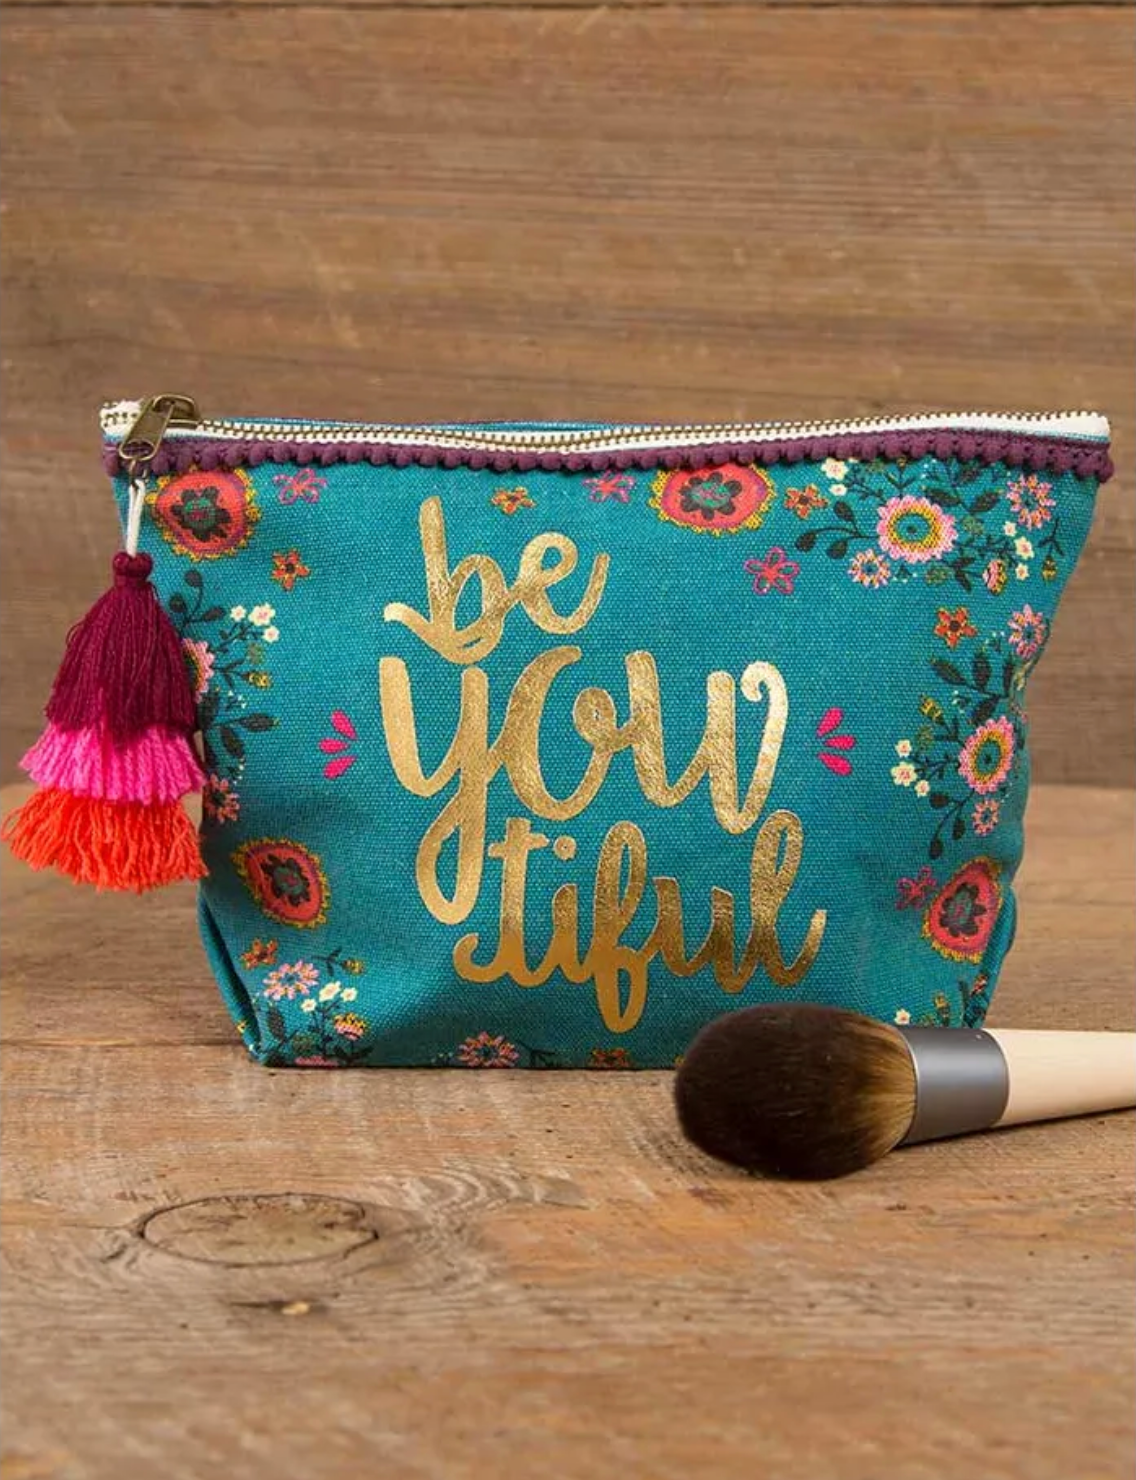 Be-you-tiful Canvas Pouch